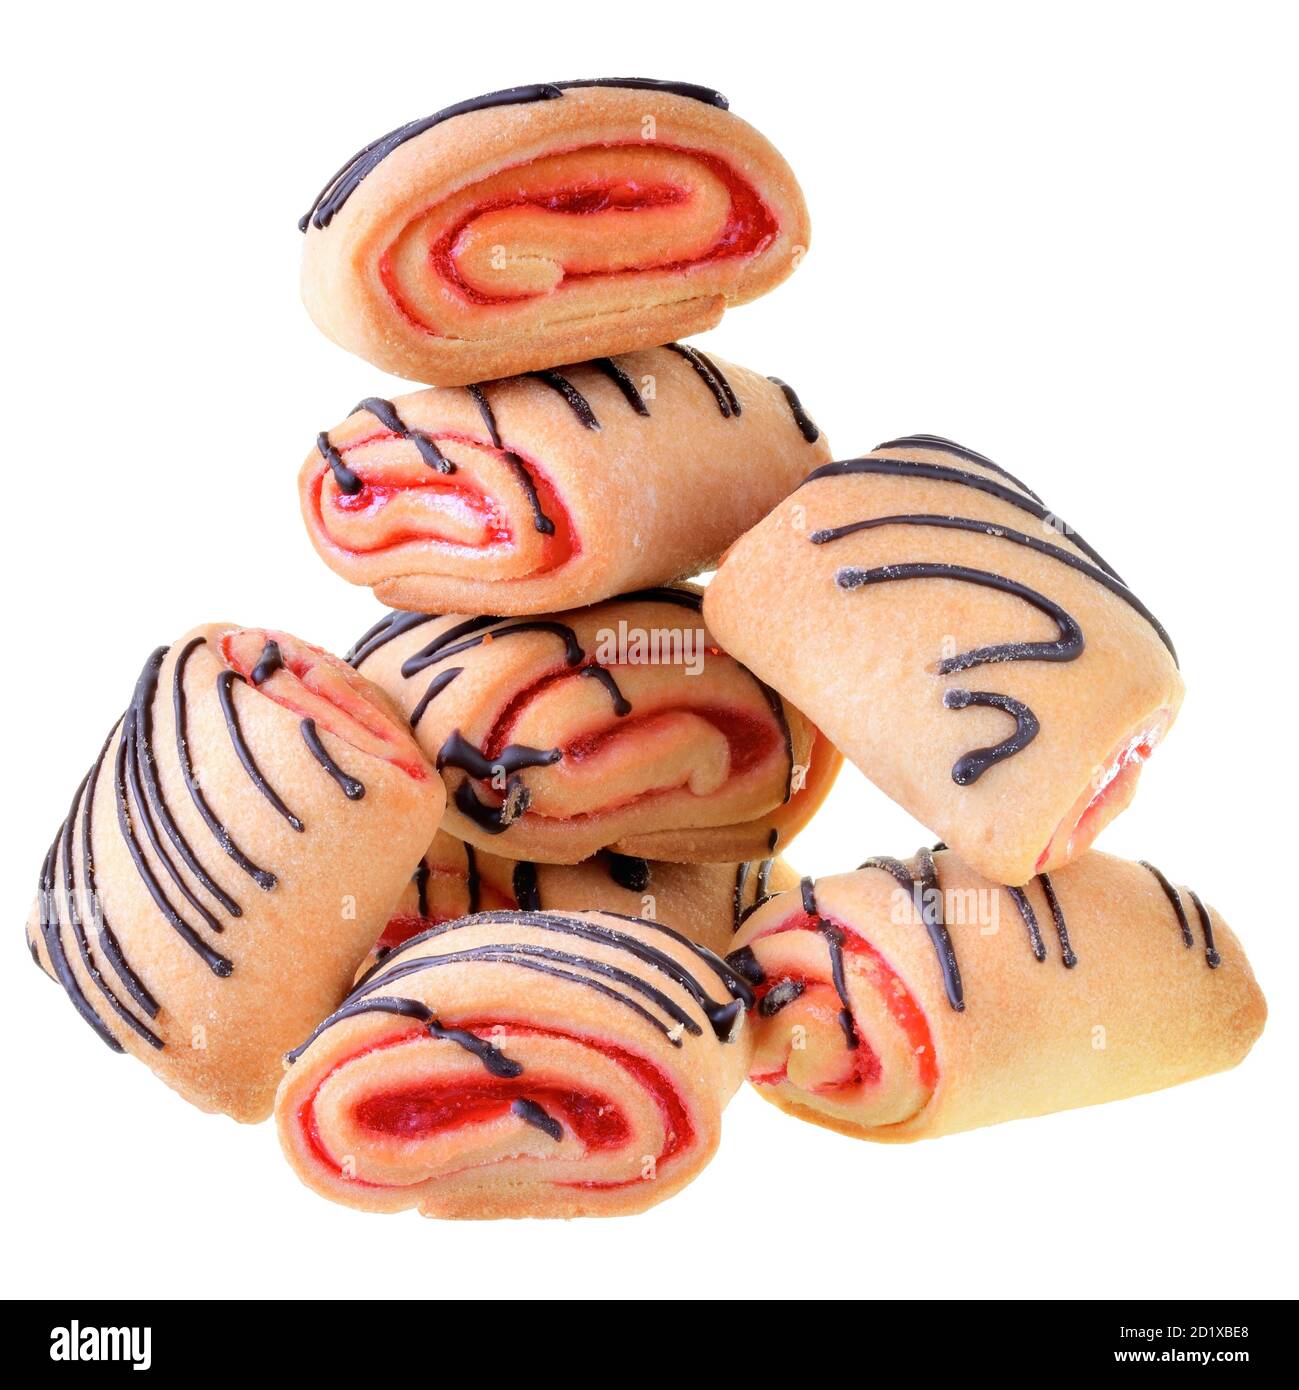 Cookies rolls with strawberry jam and chocolate icing isolated on a white background. Stock Photo